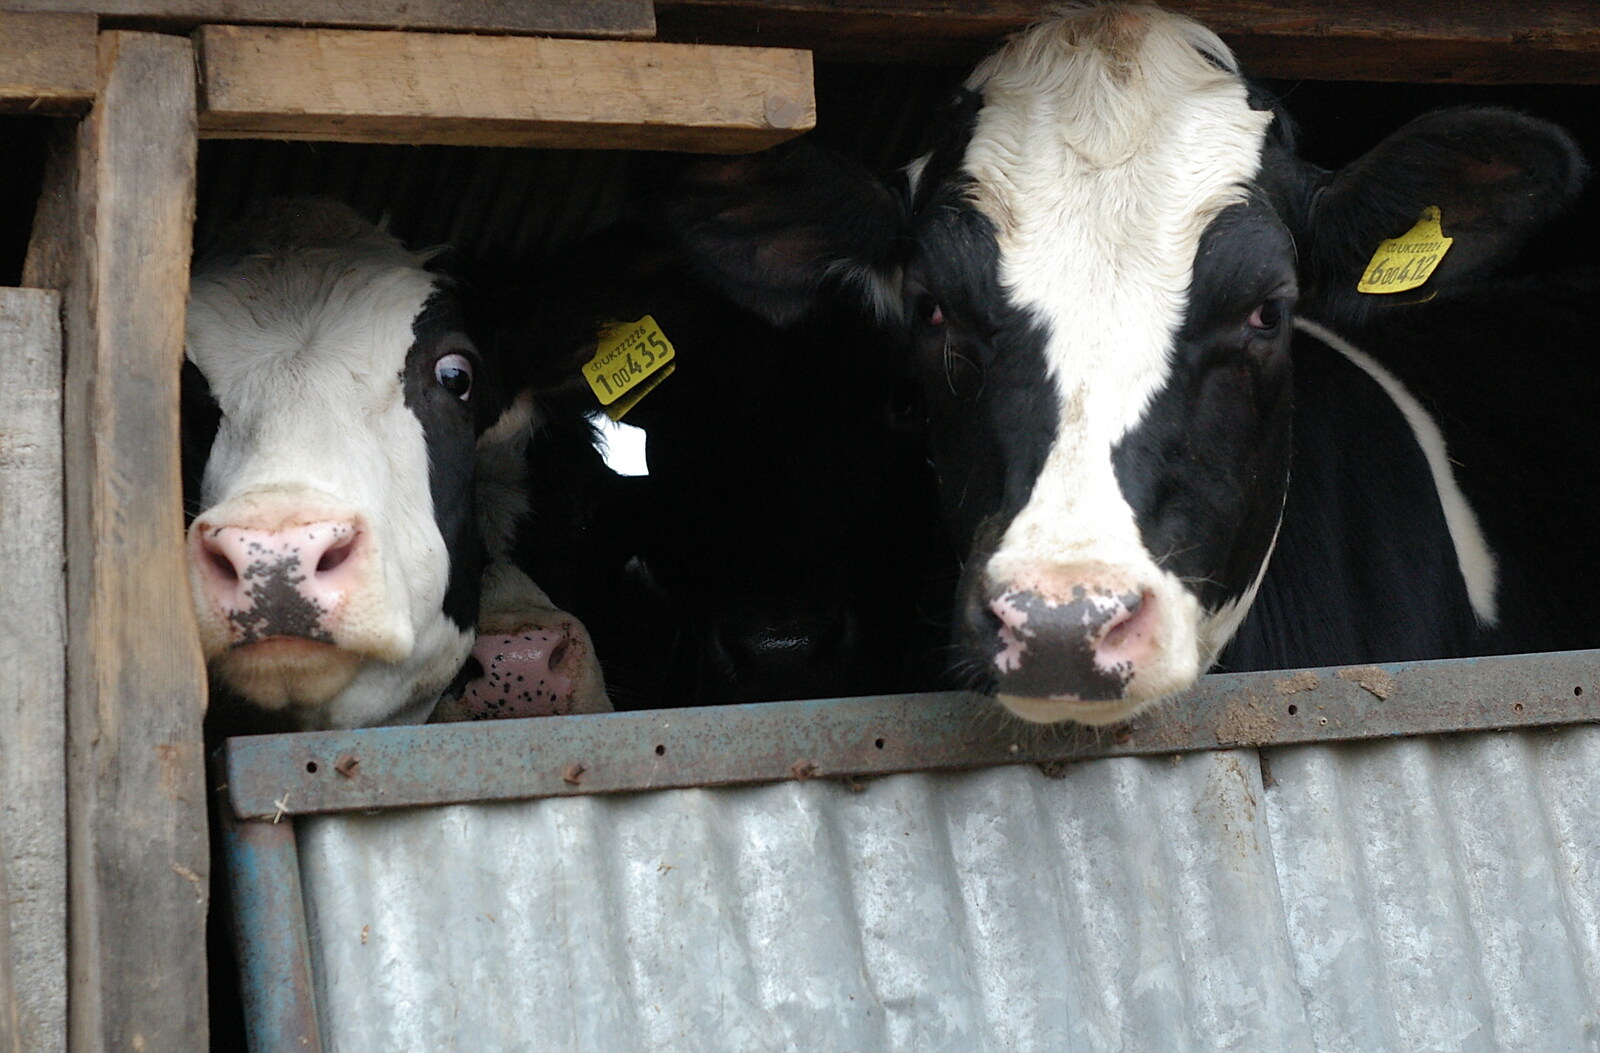 A couple of cows from Wavy and the Milking Room, Dairy Farm, Thrandeston, Suffolk - 28th March 2005